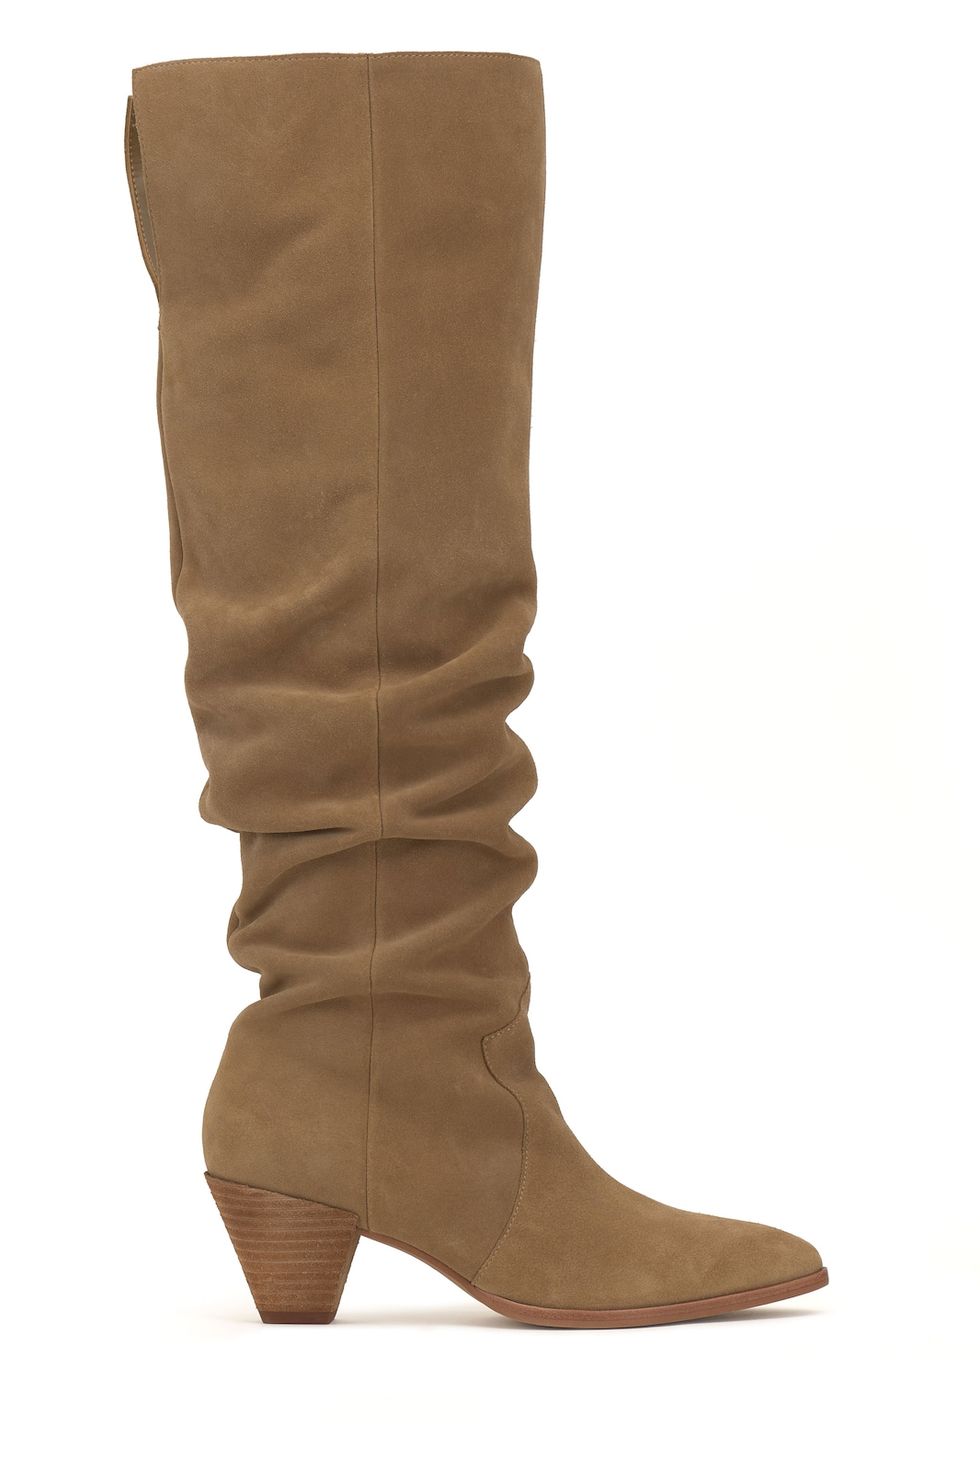 Extra Wide Calf Brown Country Boots - Wide in Foot and Ankle - Fit